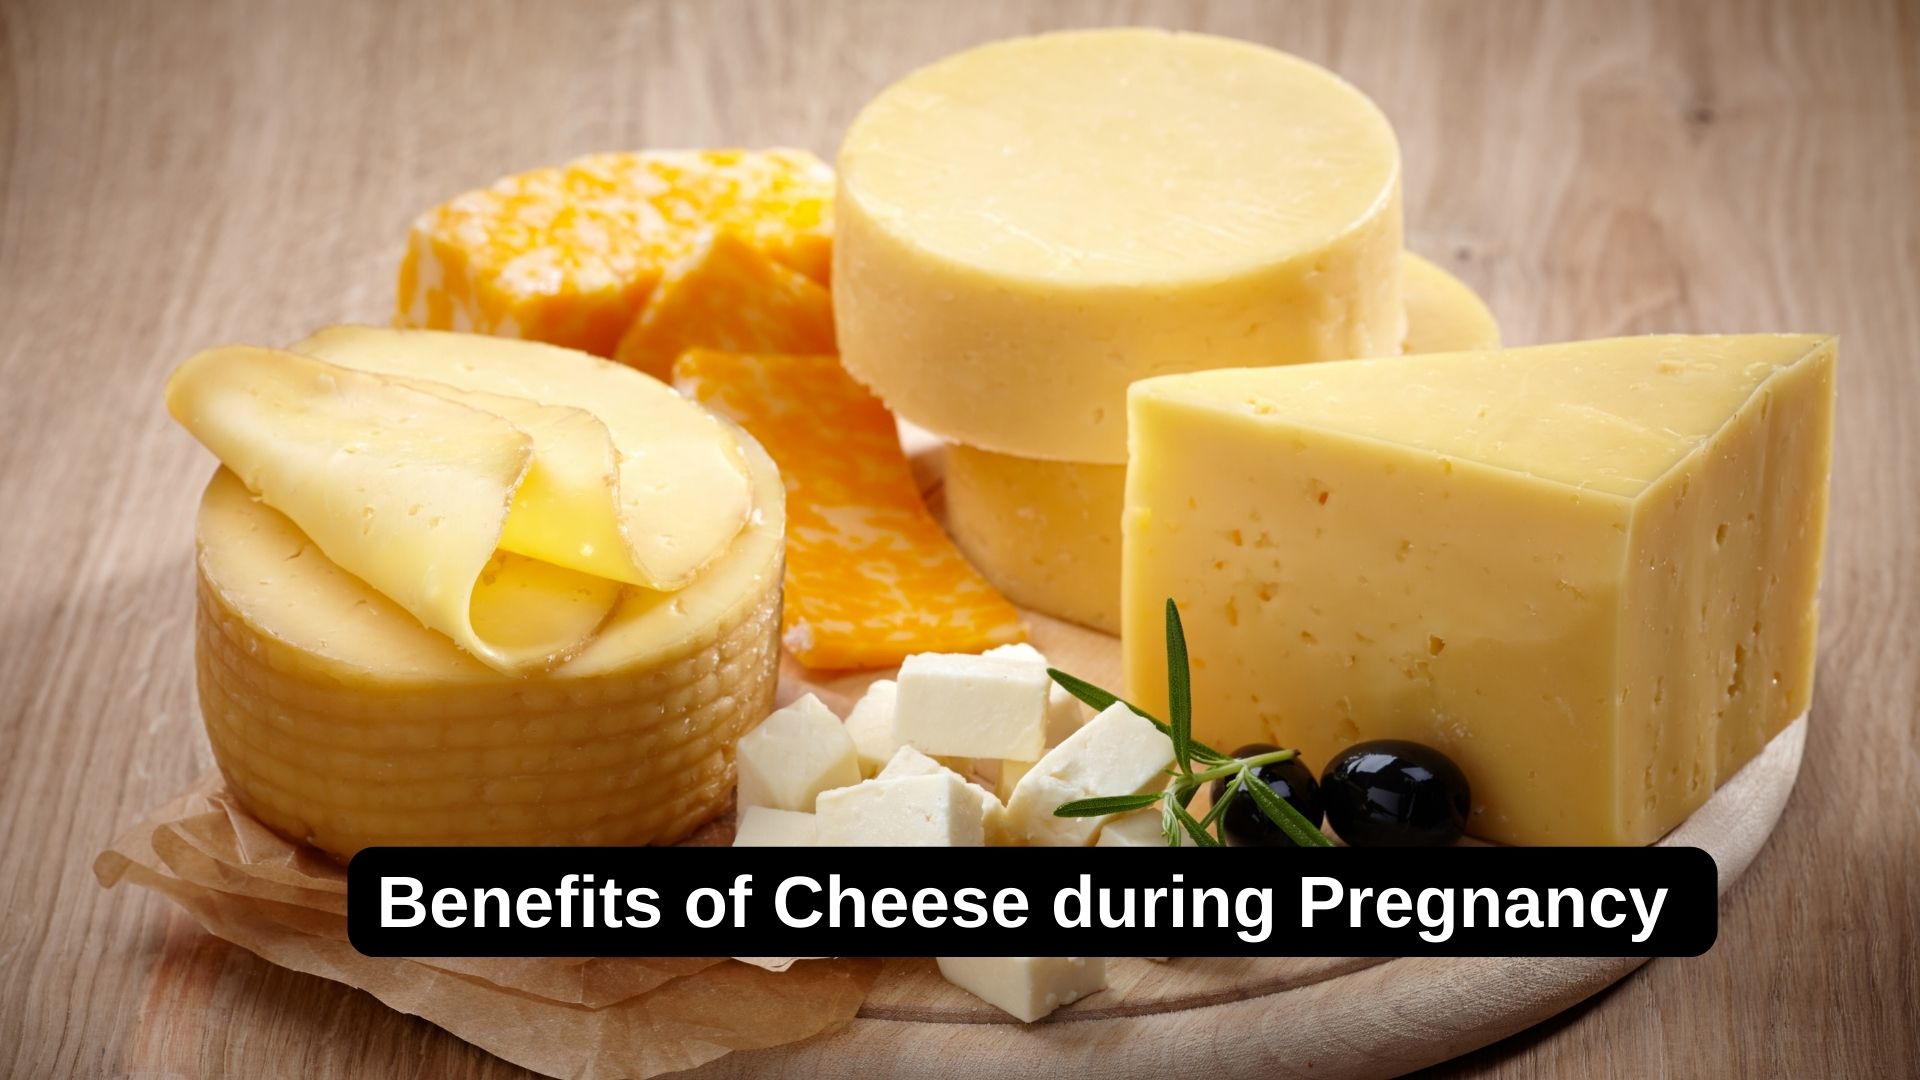 Benefits of Cheese during Pregnancy